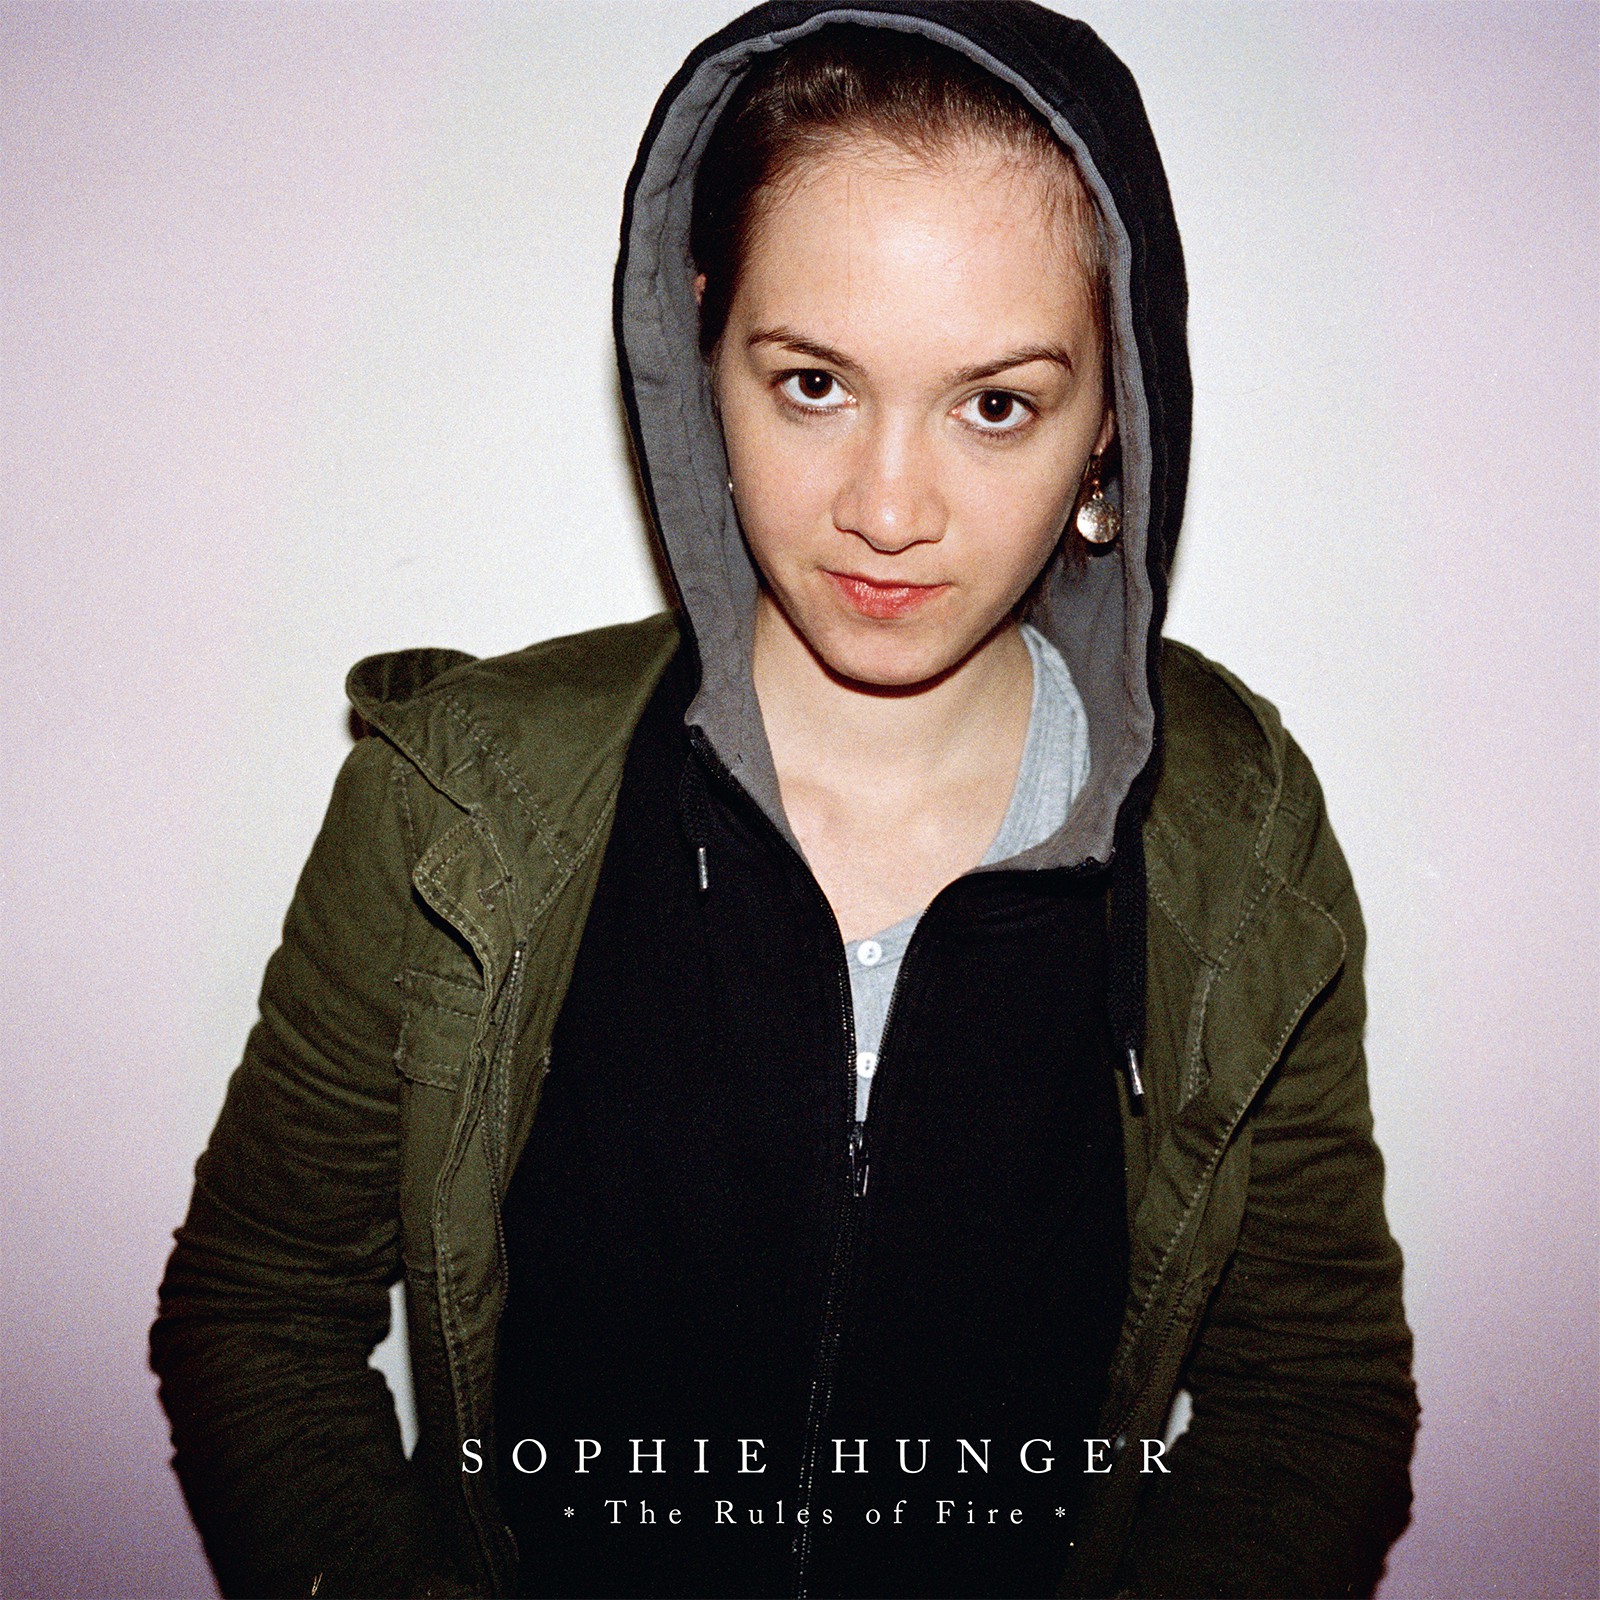 SOPHIE HUNGER - The Rules of Fire (The Archives)